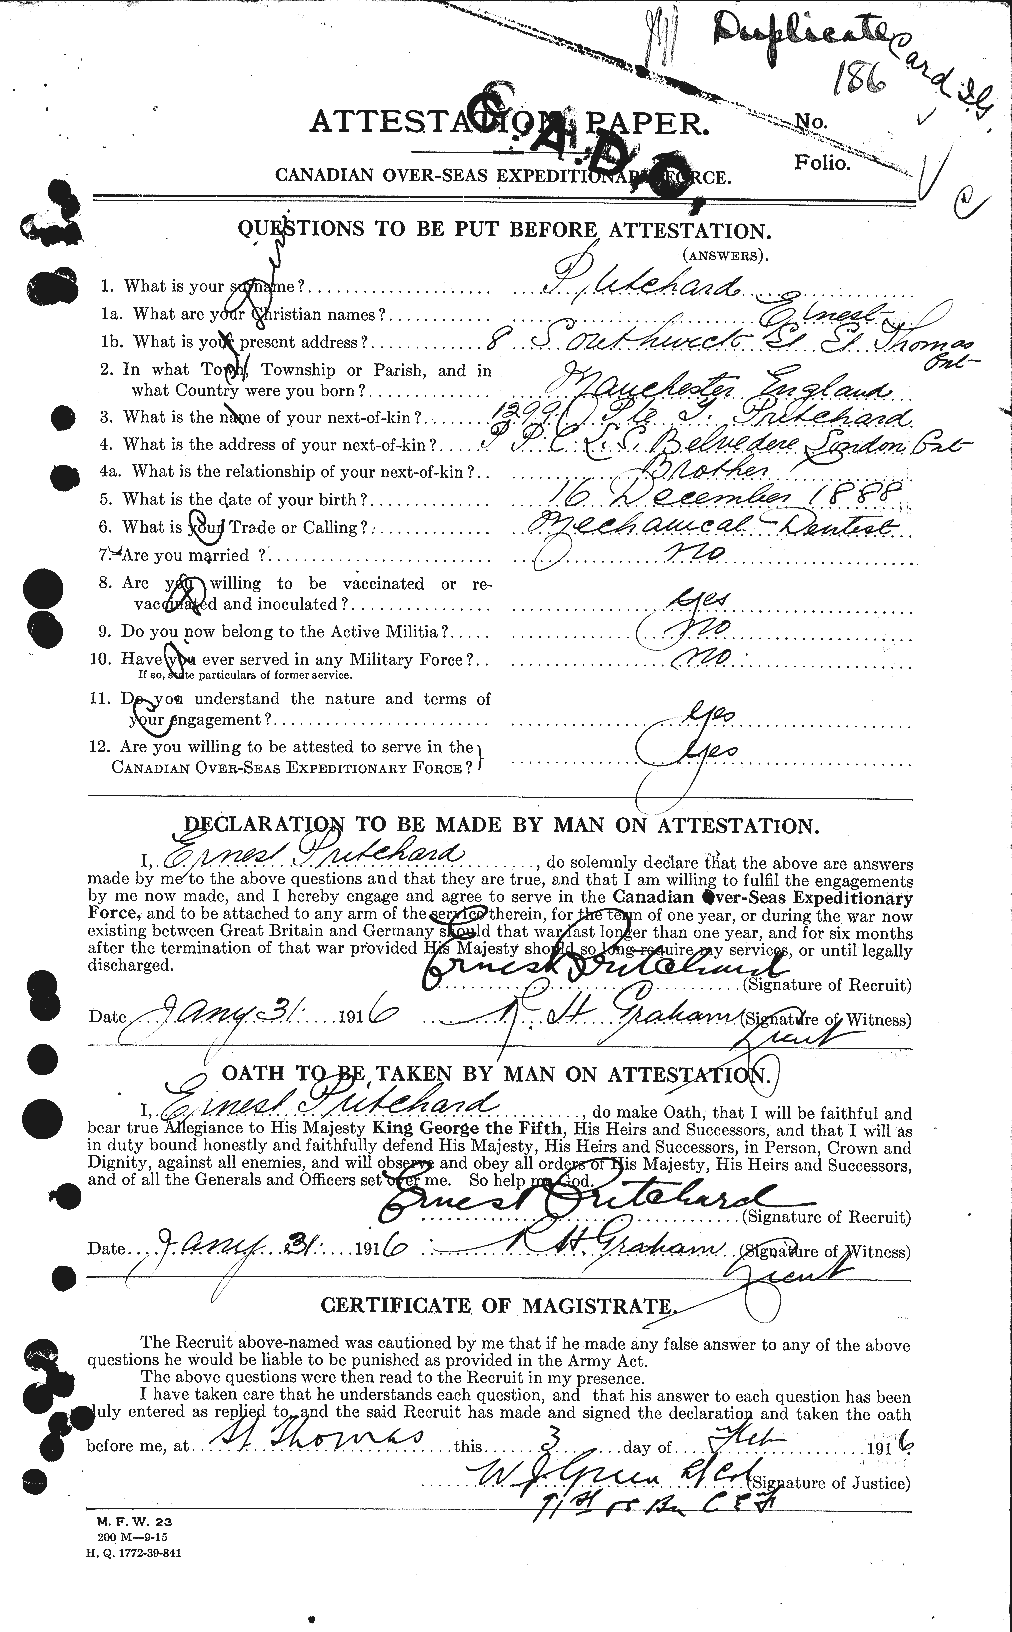 Personnel Records of the First World War - CEF 588514a